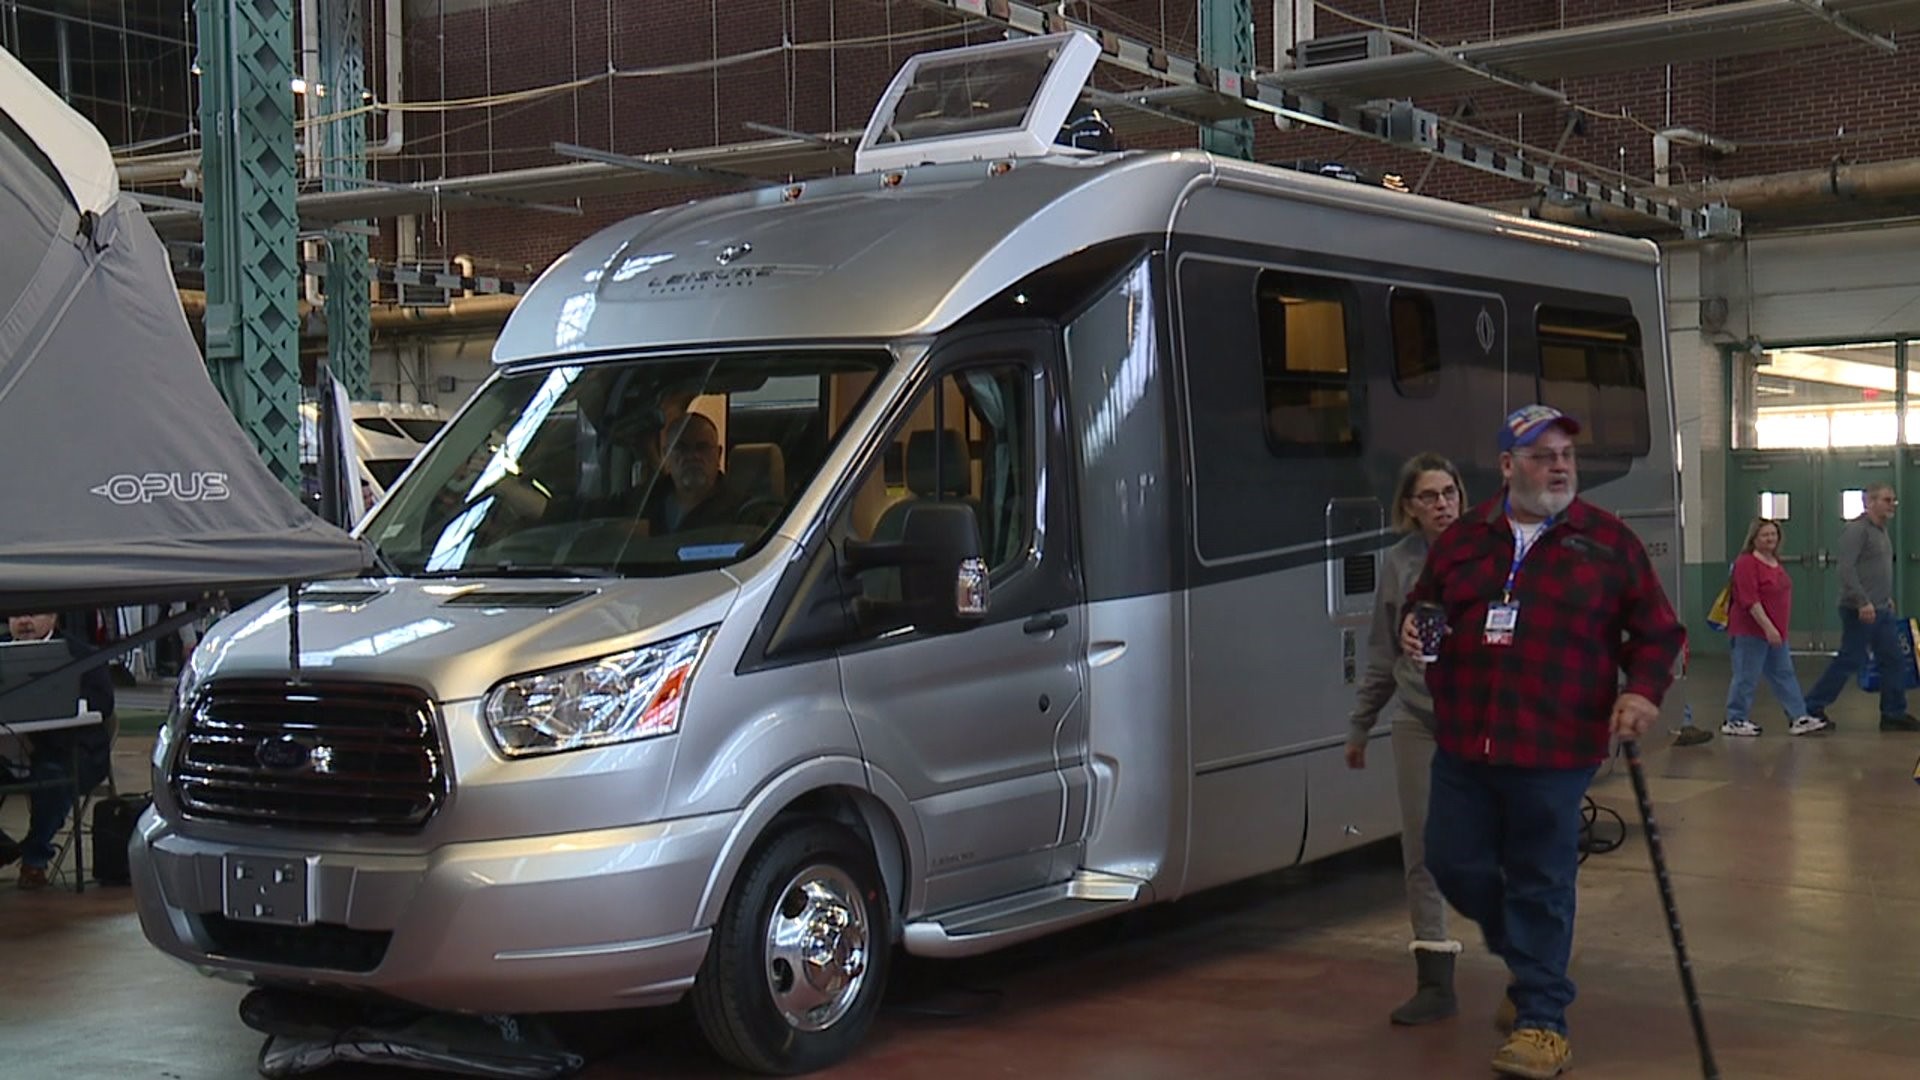 Campers gathered in Harrisburg for one of the largest Camping and RV shows in the area